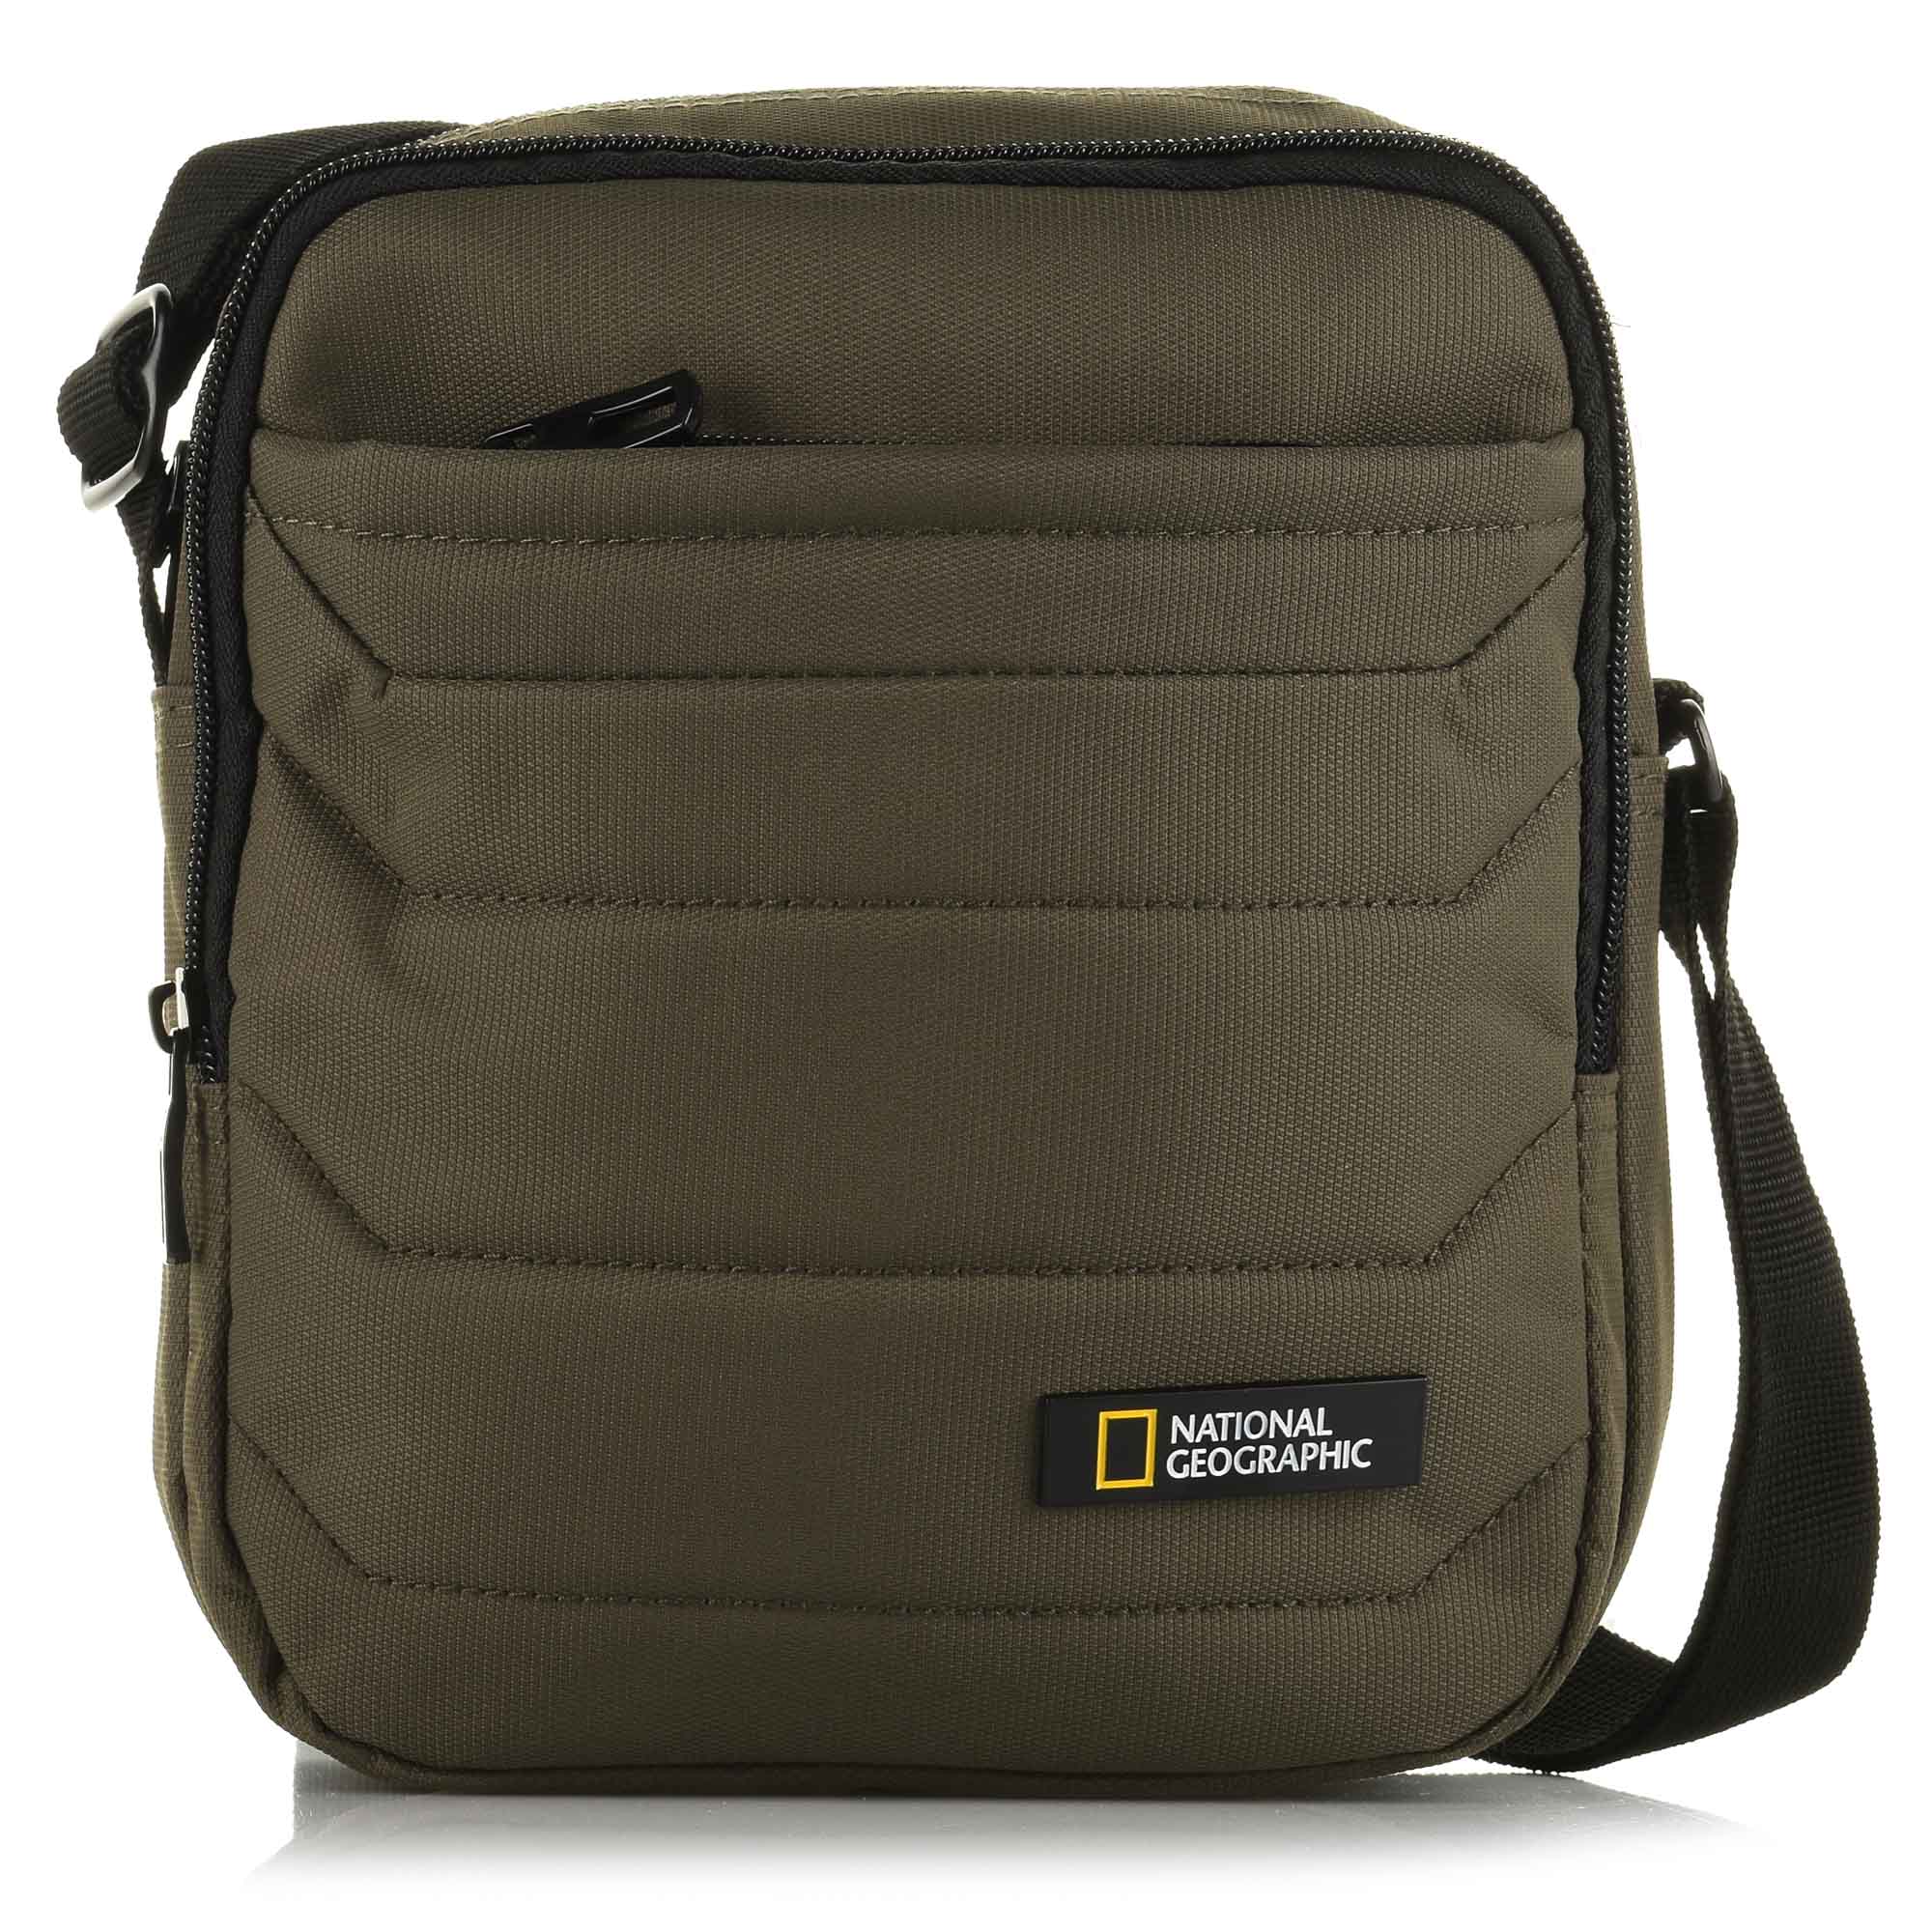 National Geographic Τσαντάκι Χιαστί National Geographic Pro Range Utility Bag N00702.11 Khaki